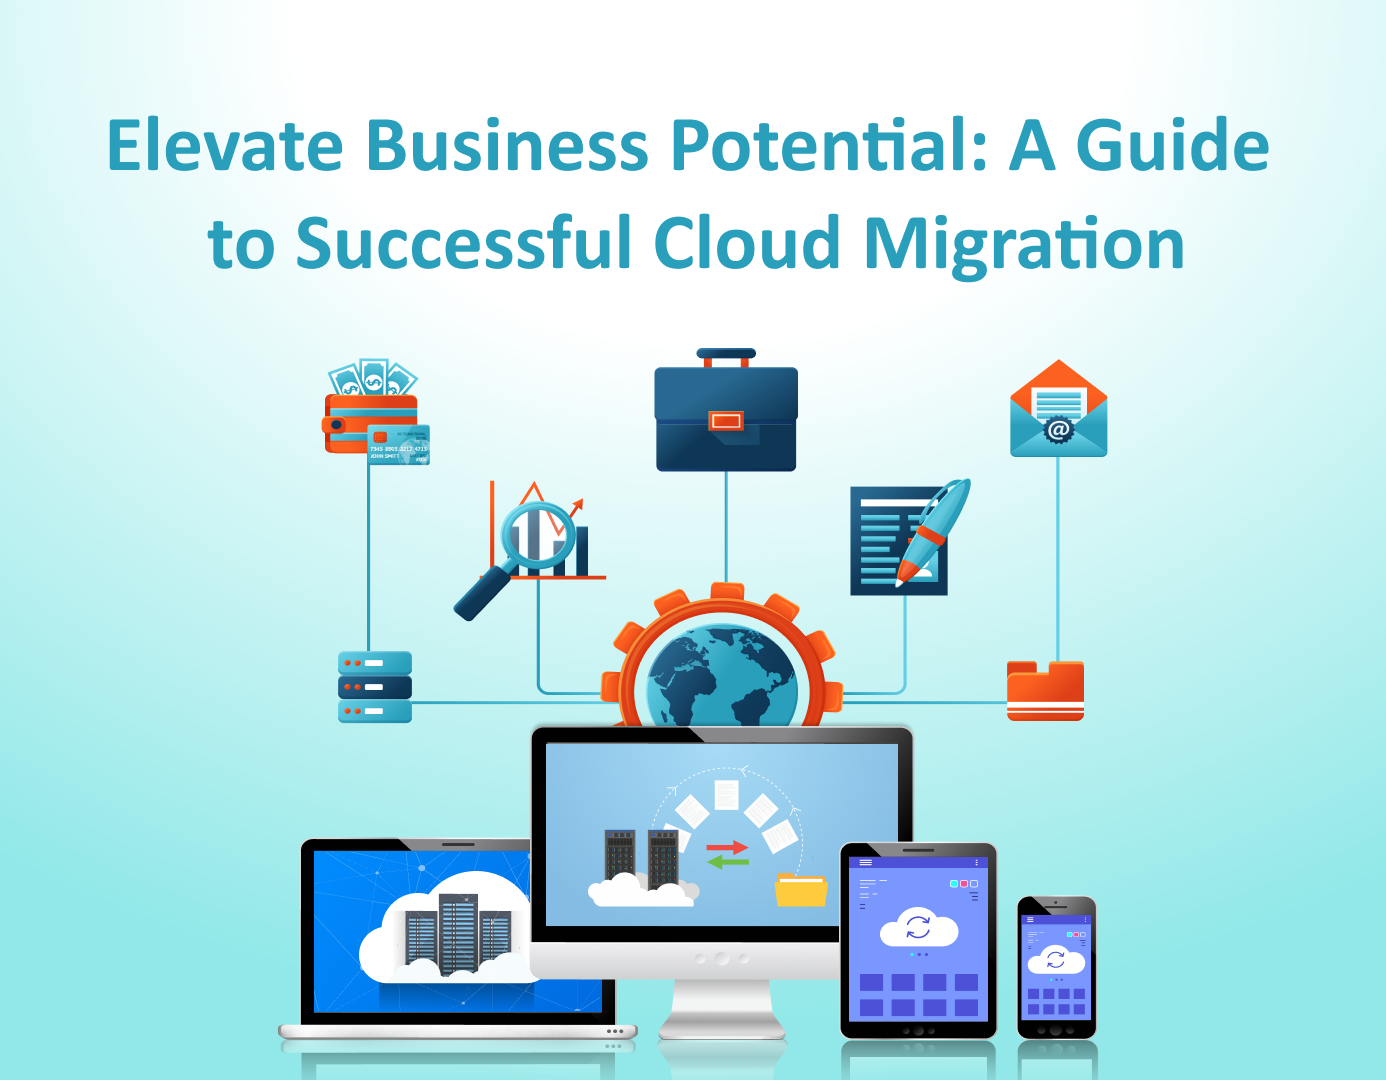 Representing the transformative potential of cloud migration with key concepts like strategies, benefits, types, and best practices.